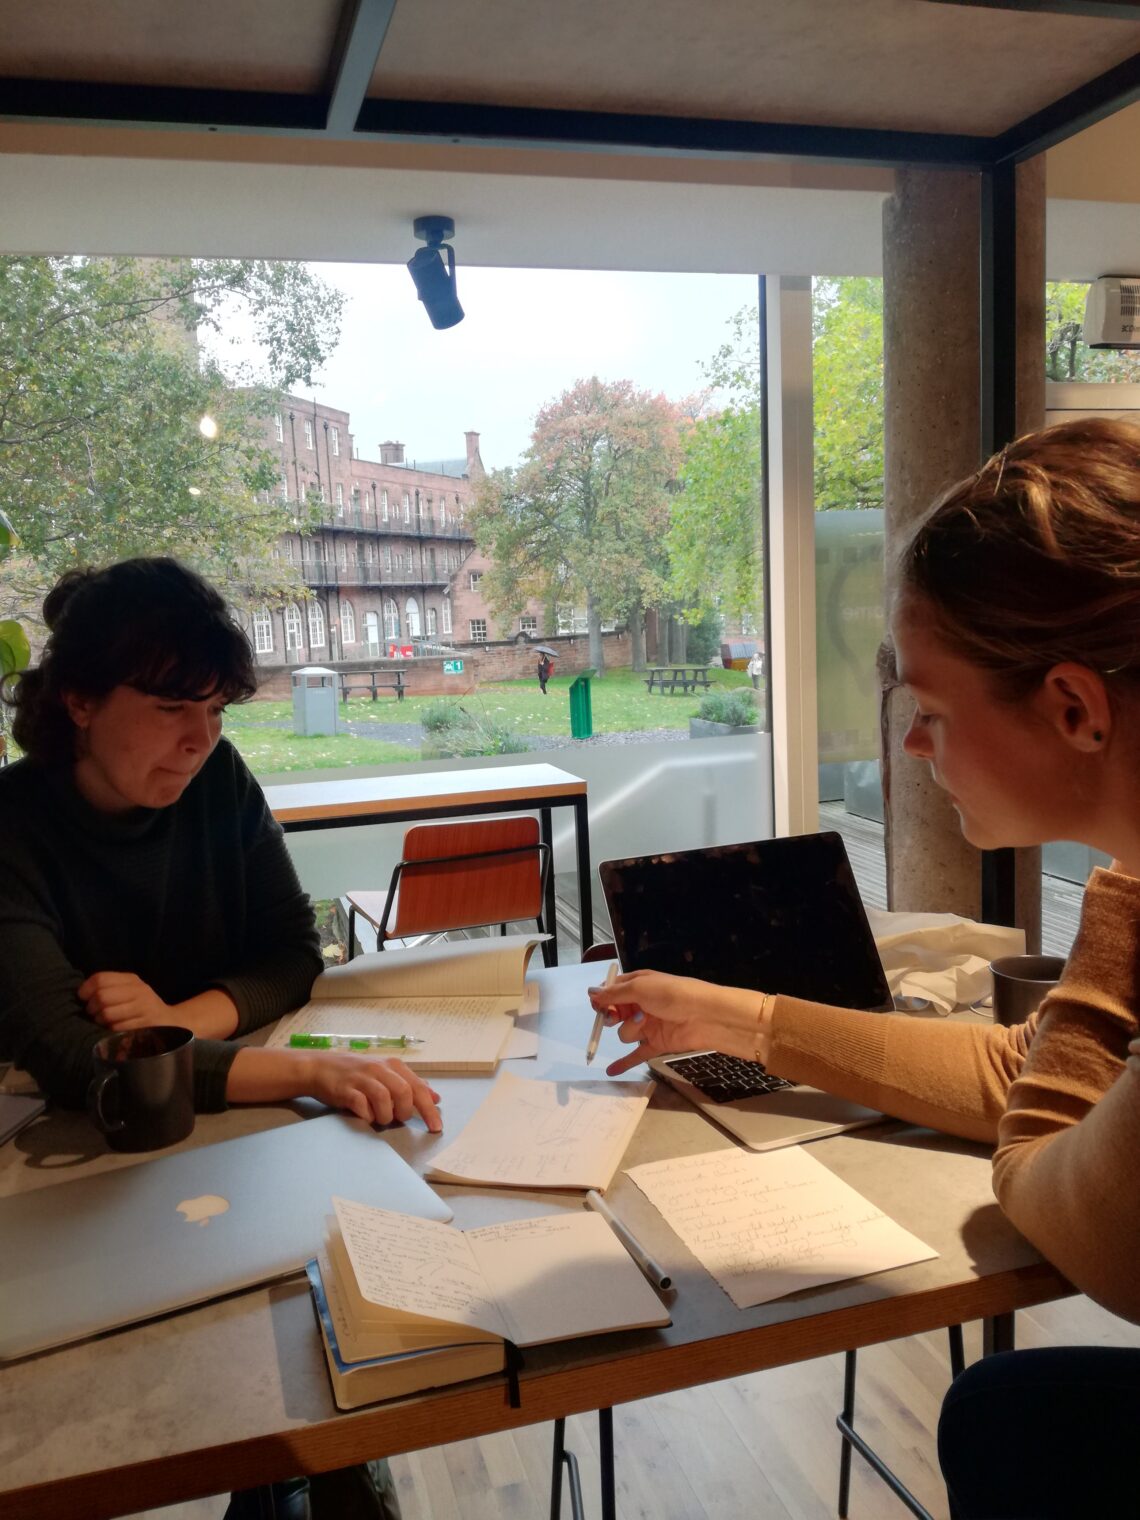 Two white women sit at a table talking and pointing at notes. Two laptops are visible suggesting a working environment. In the background through an open window you can see trees and a red brick building